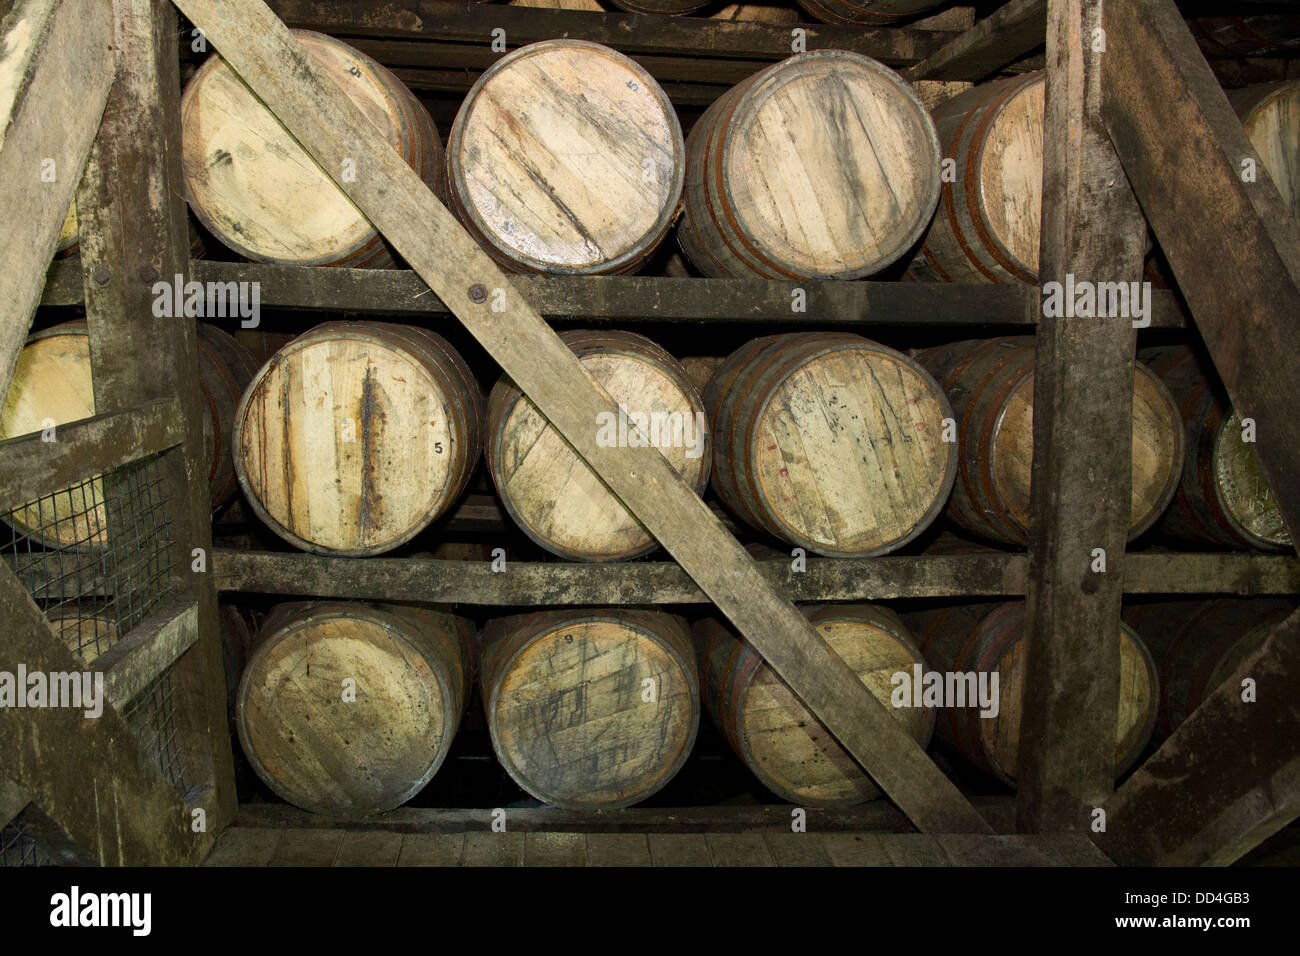 Interior of the Jim Beam Bourbon and Whiskey distillery, Clermont, Kentucky, USA Stock Photo